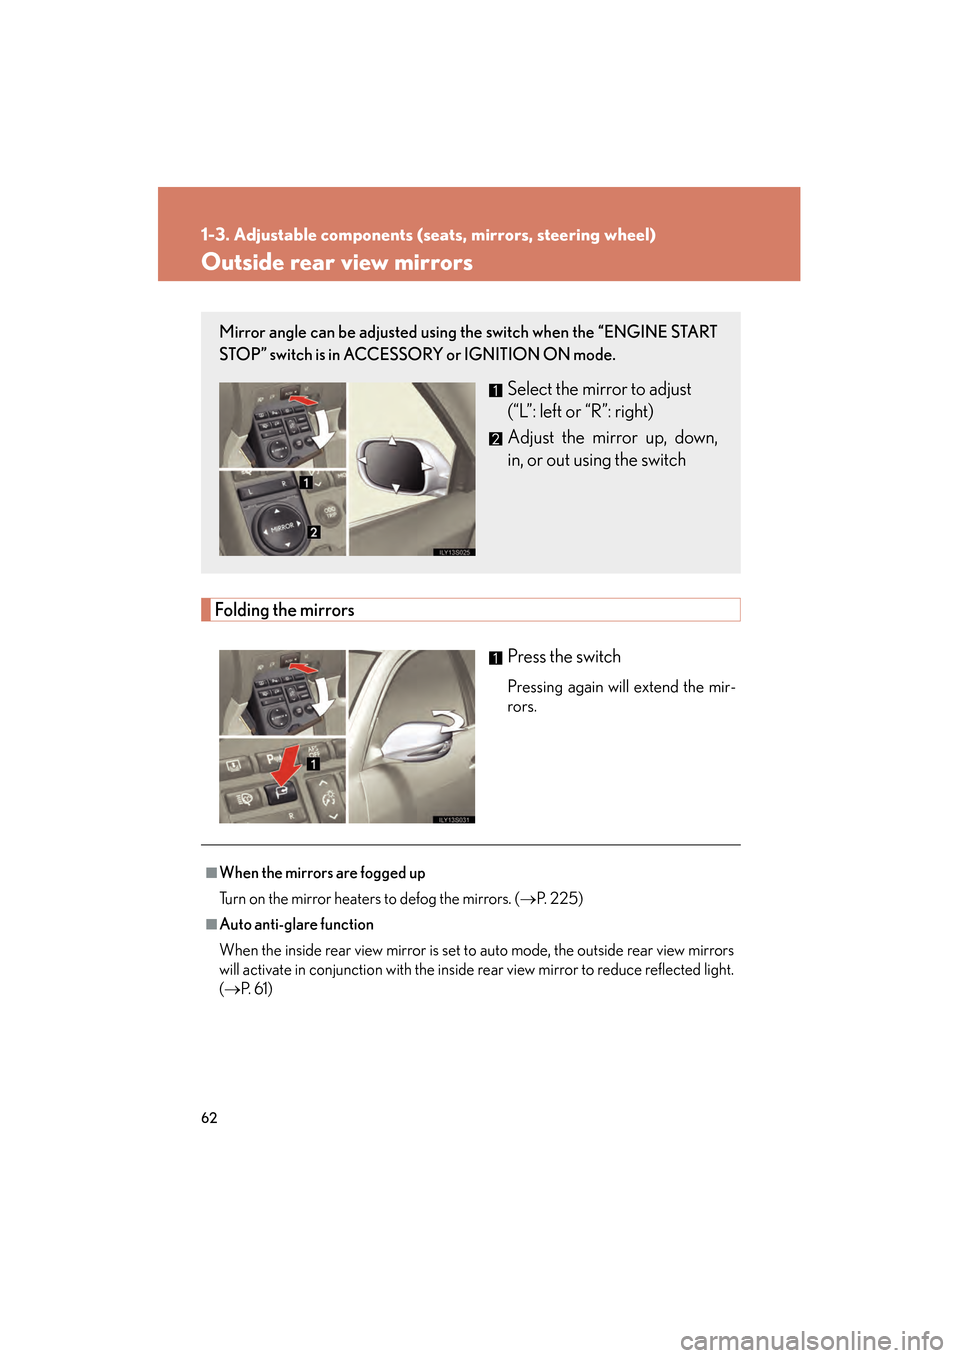 Lexus GS350 2008  Owners Manual 62
1-3. Adjustable components (seats, mirrors, steering wheel)
GS_G_U
June 19, 2008 12:54 pm
Outside rear view mirrors
Folding the mirrorsPress the switch
Pressing again will extend the mir-
rors.
Mir